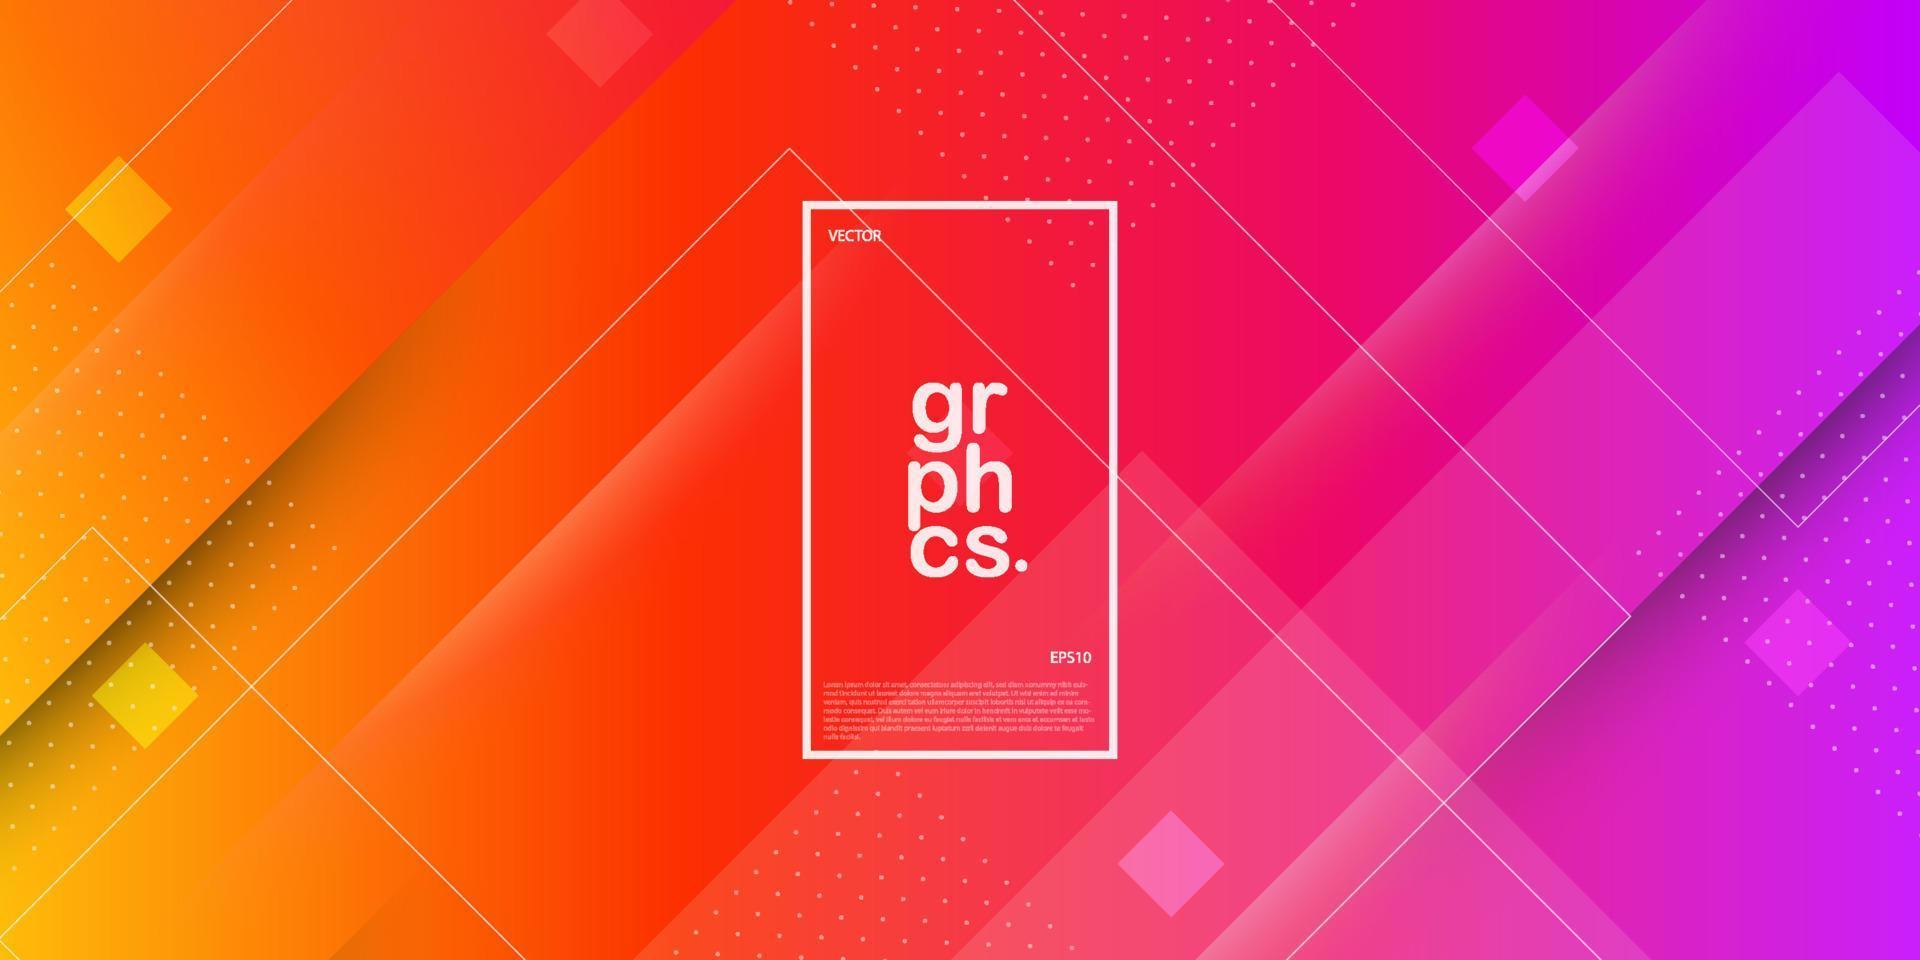 Abstract pink and orange vector template with simple pattern background.Simple design on abstract background with colorful gradient. New design for ad, poster, banner.Eps 10 vector